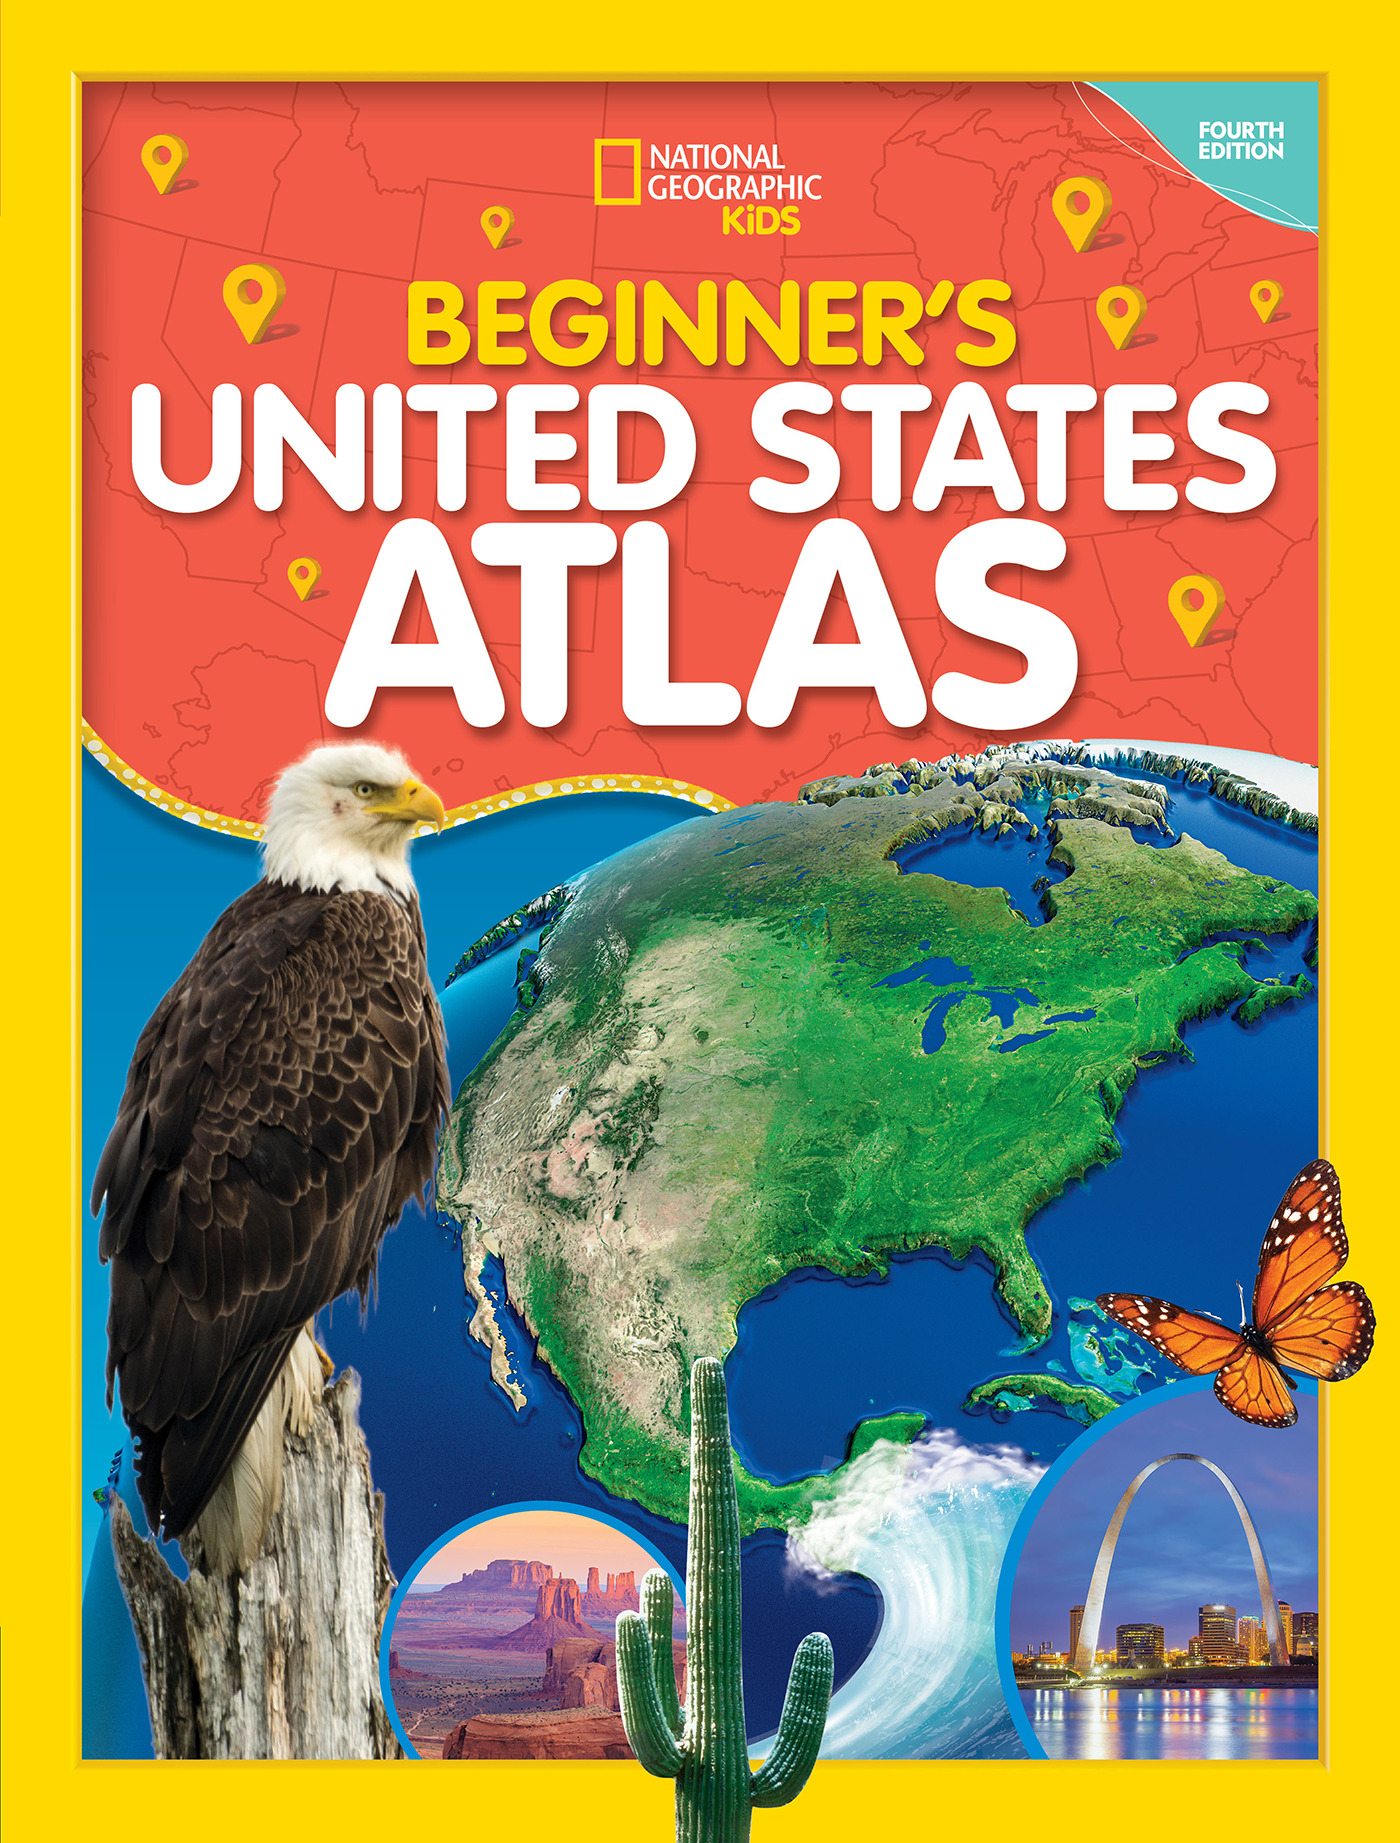 National Geographic Kids Beginner's United States Atlas 4th edition | 